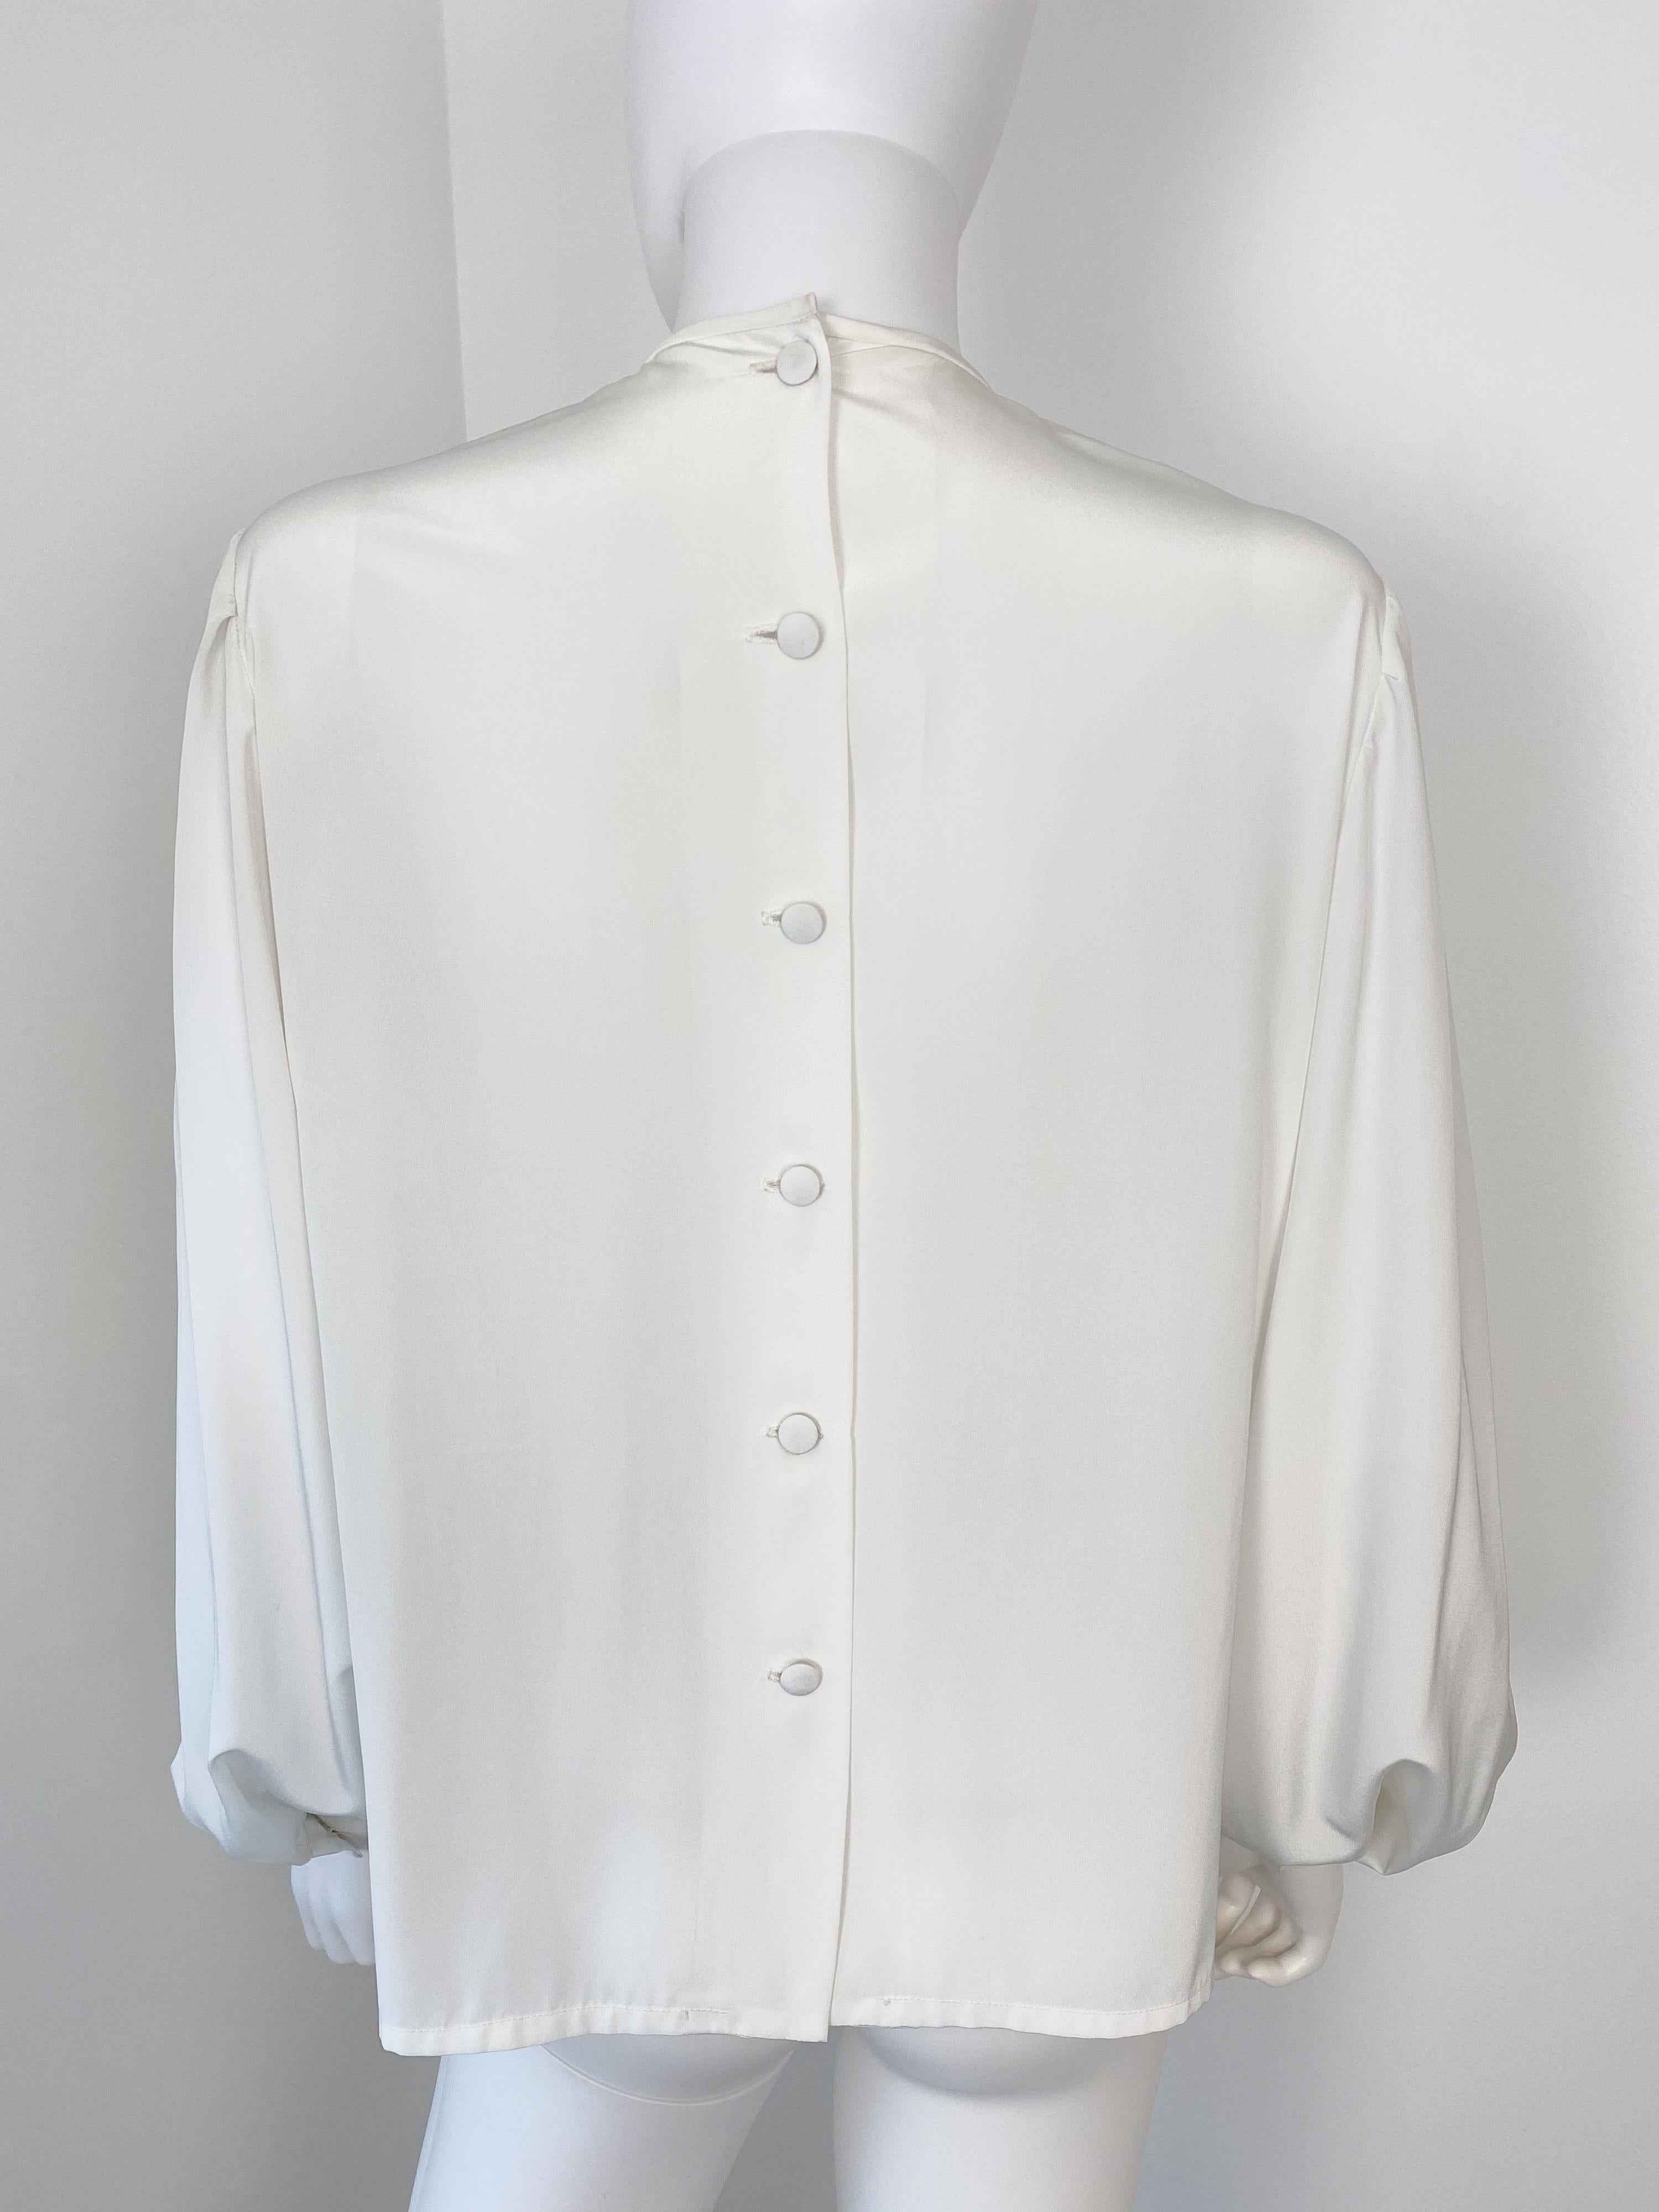 Vintage 1970s Silky Polyester Blouse Top White Origami Pleat Size 10/12 For Sale 5